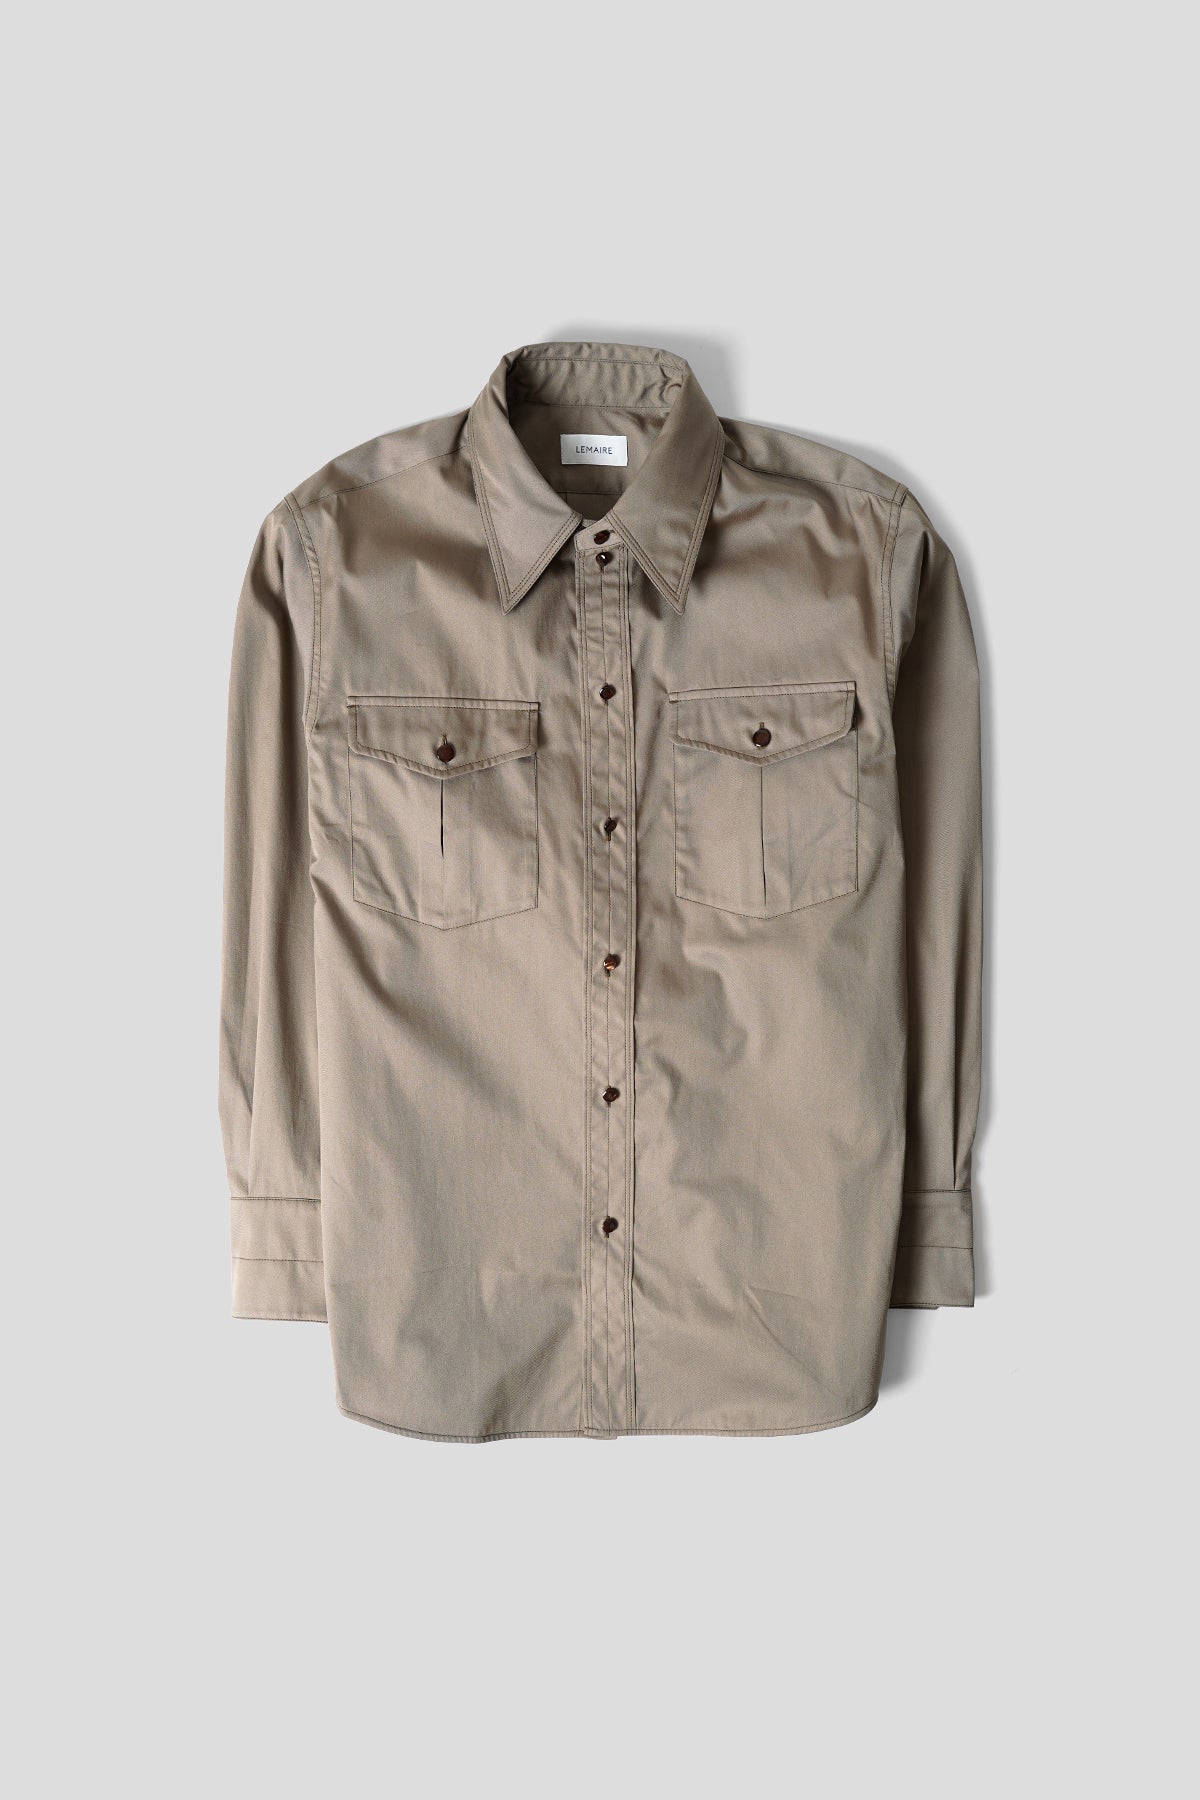 LEMAIRE - CHEMISE WESTERN TAUPE - LE LABO STORE